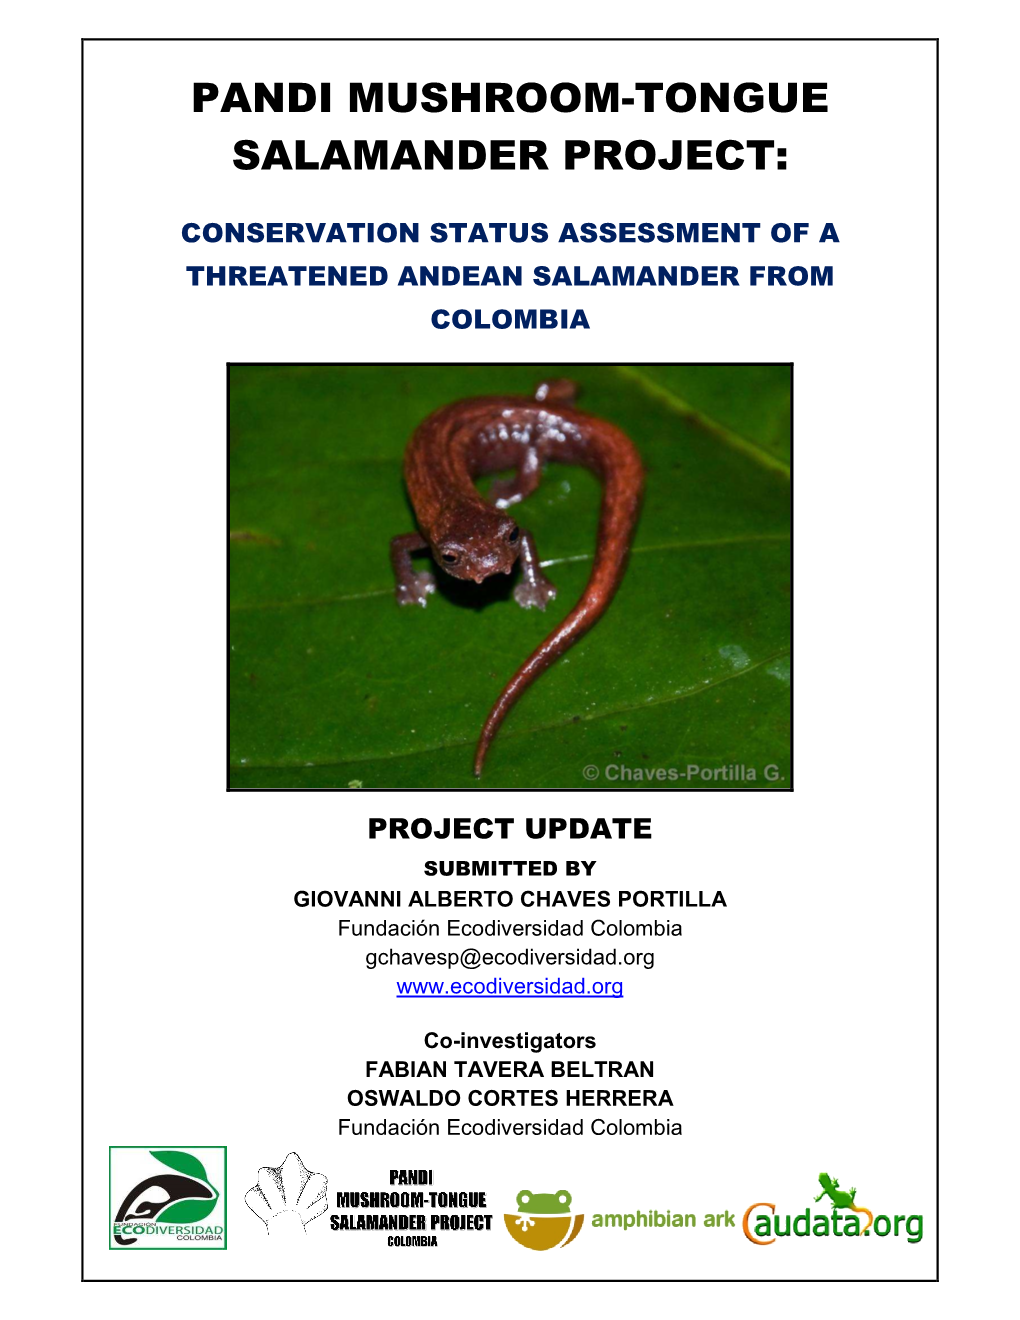 PROJECT UPDATE SUBMITTED by GIOVANNI ALBERTO CHAVES PORTILLA Fundación Ecodiversidad Colombia Gchavesp@Ecodiversidad.Org